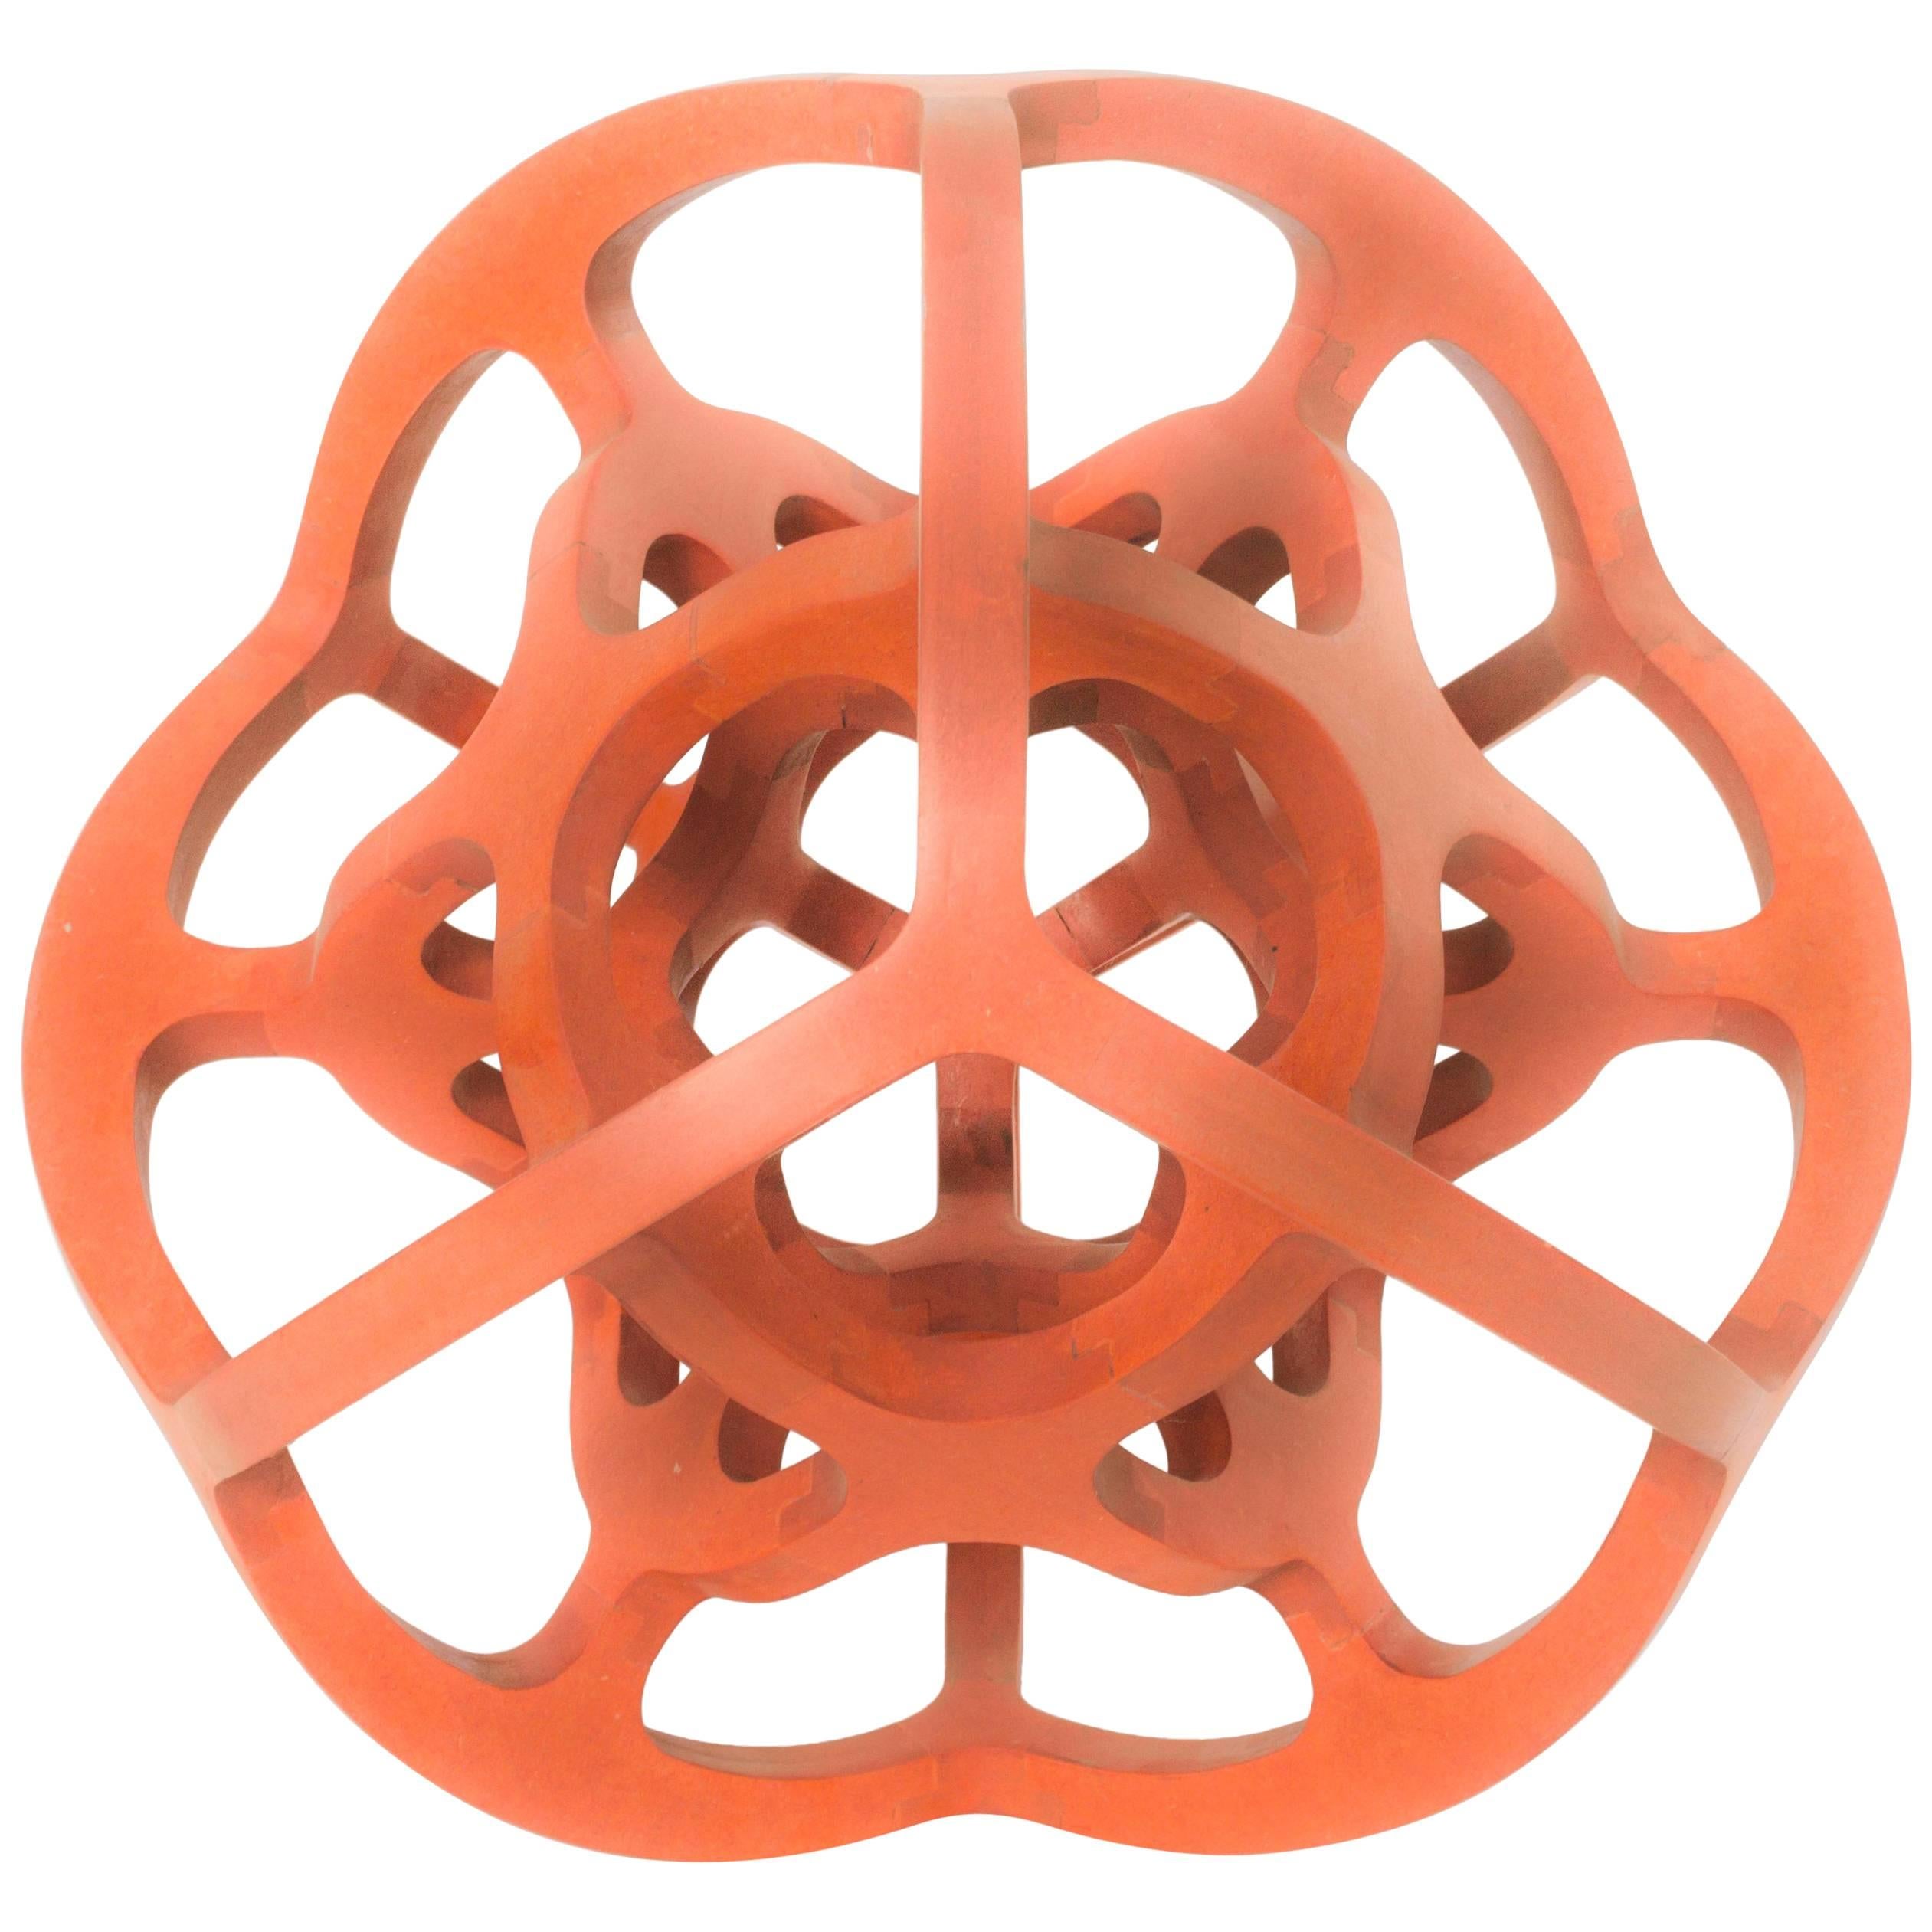 "Aquila V" Contemporary Mexican Geometric Handcrafted Dual Cube Sphere Sculpture im Angebot